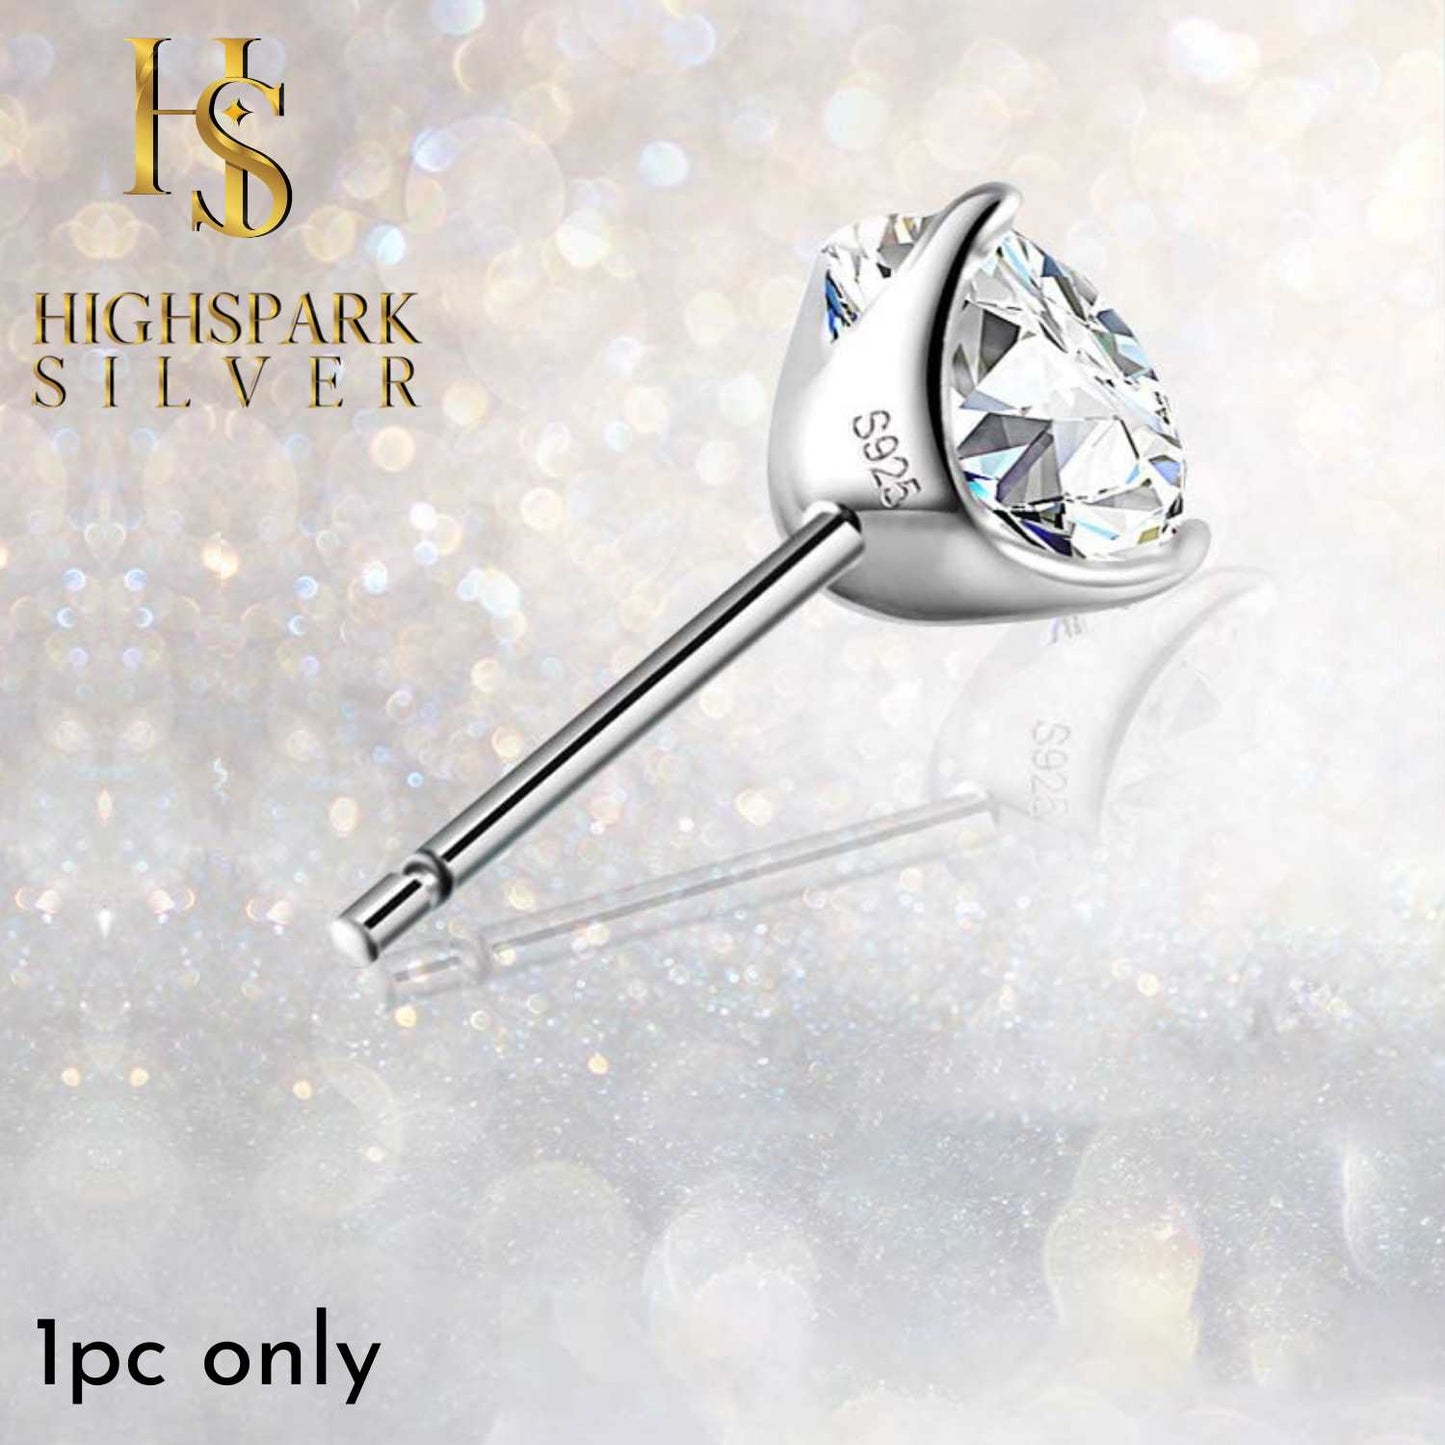 Mens Solitaire Stud Earrings in 92.5 Silver - 1 piece - Sparkling Martini by HighSpark - Sparkling Swiss Zirconia in Martini Style 3 Prong Setting